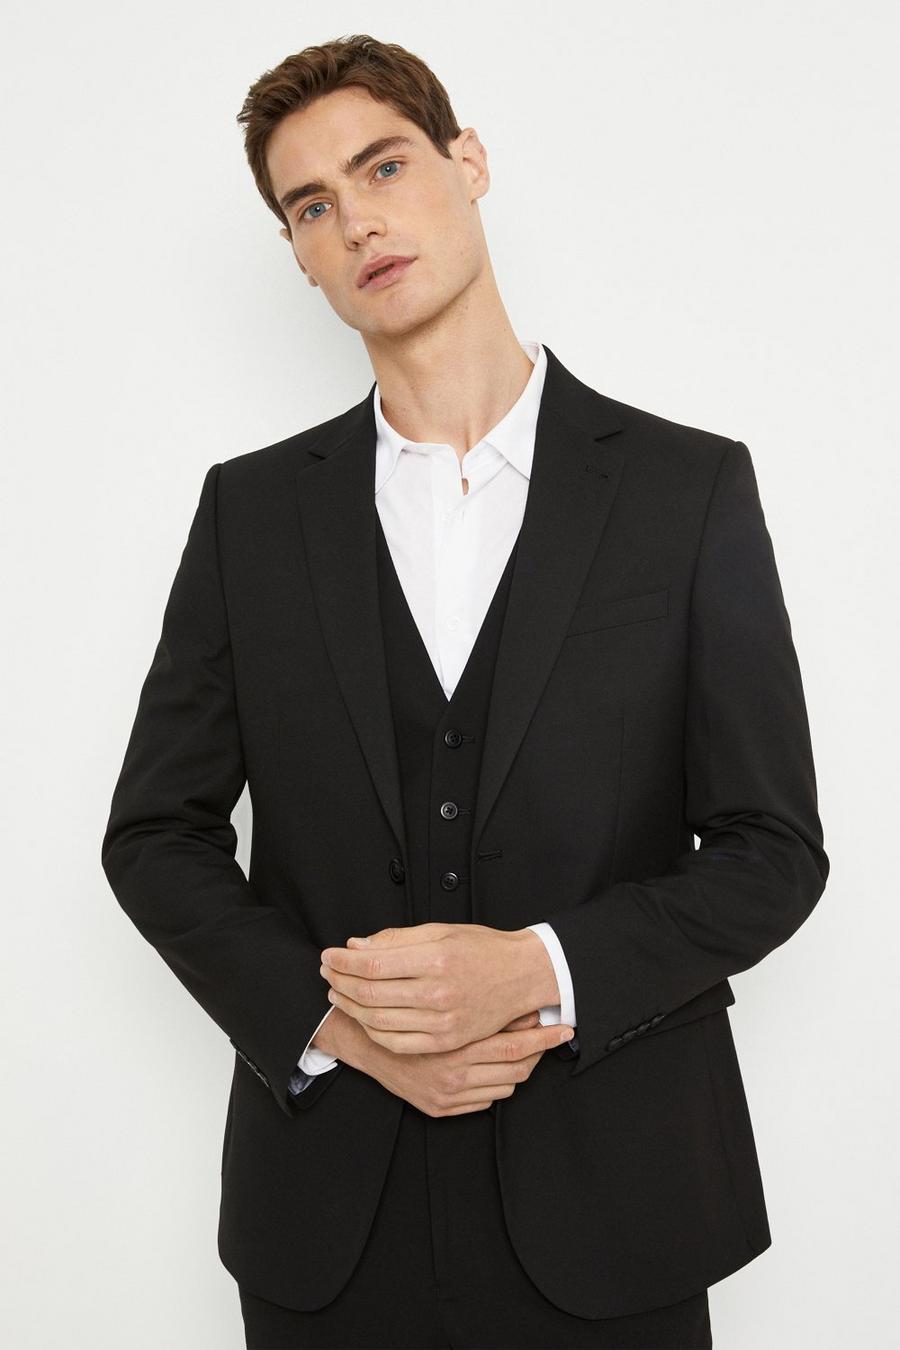 Plus And Tall Tailored Black Three-Piece Suit